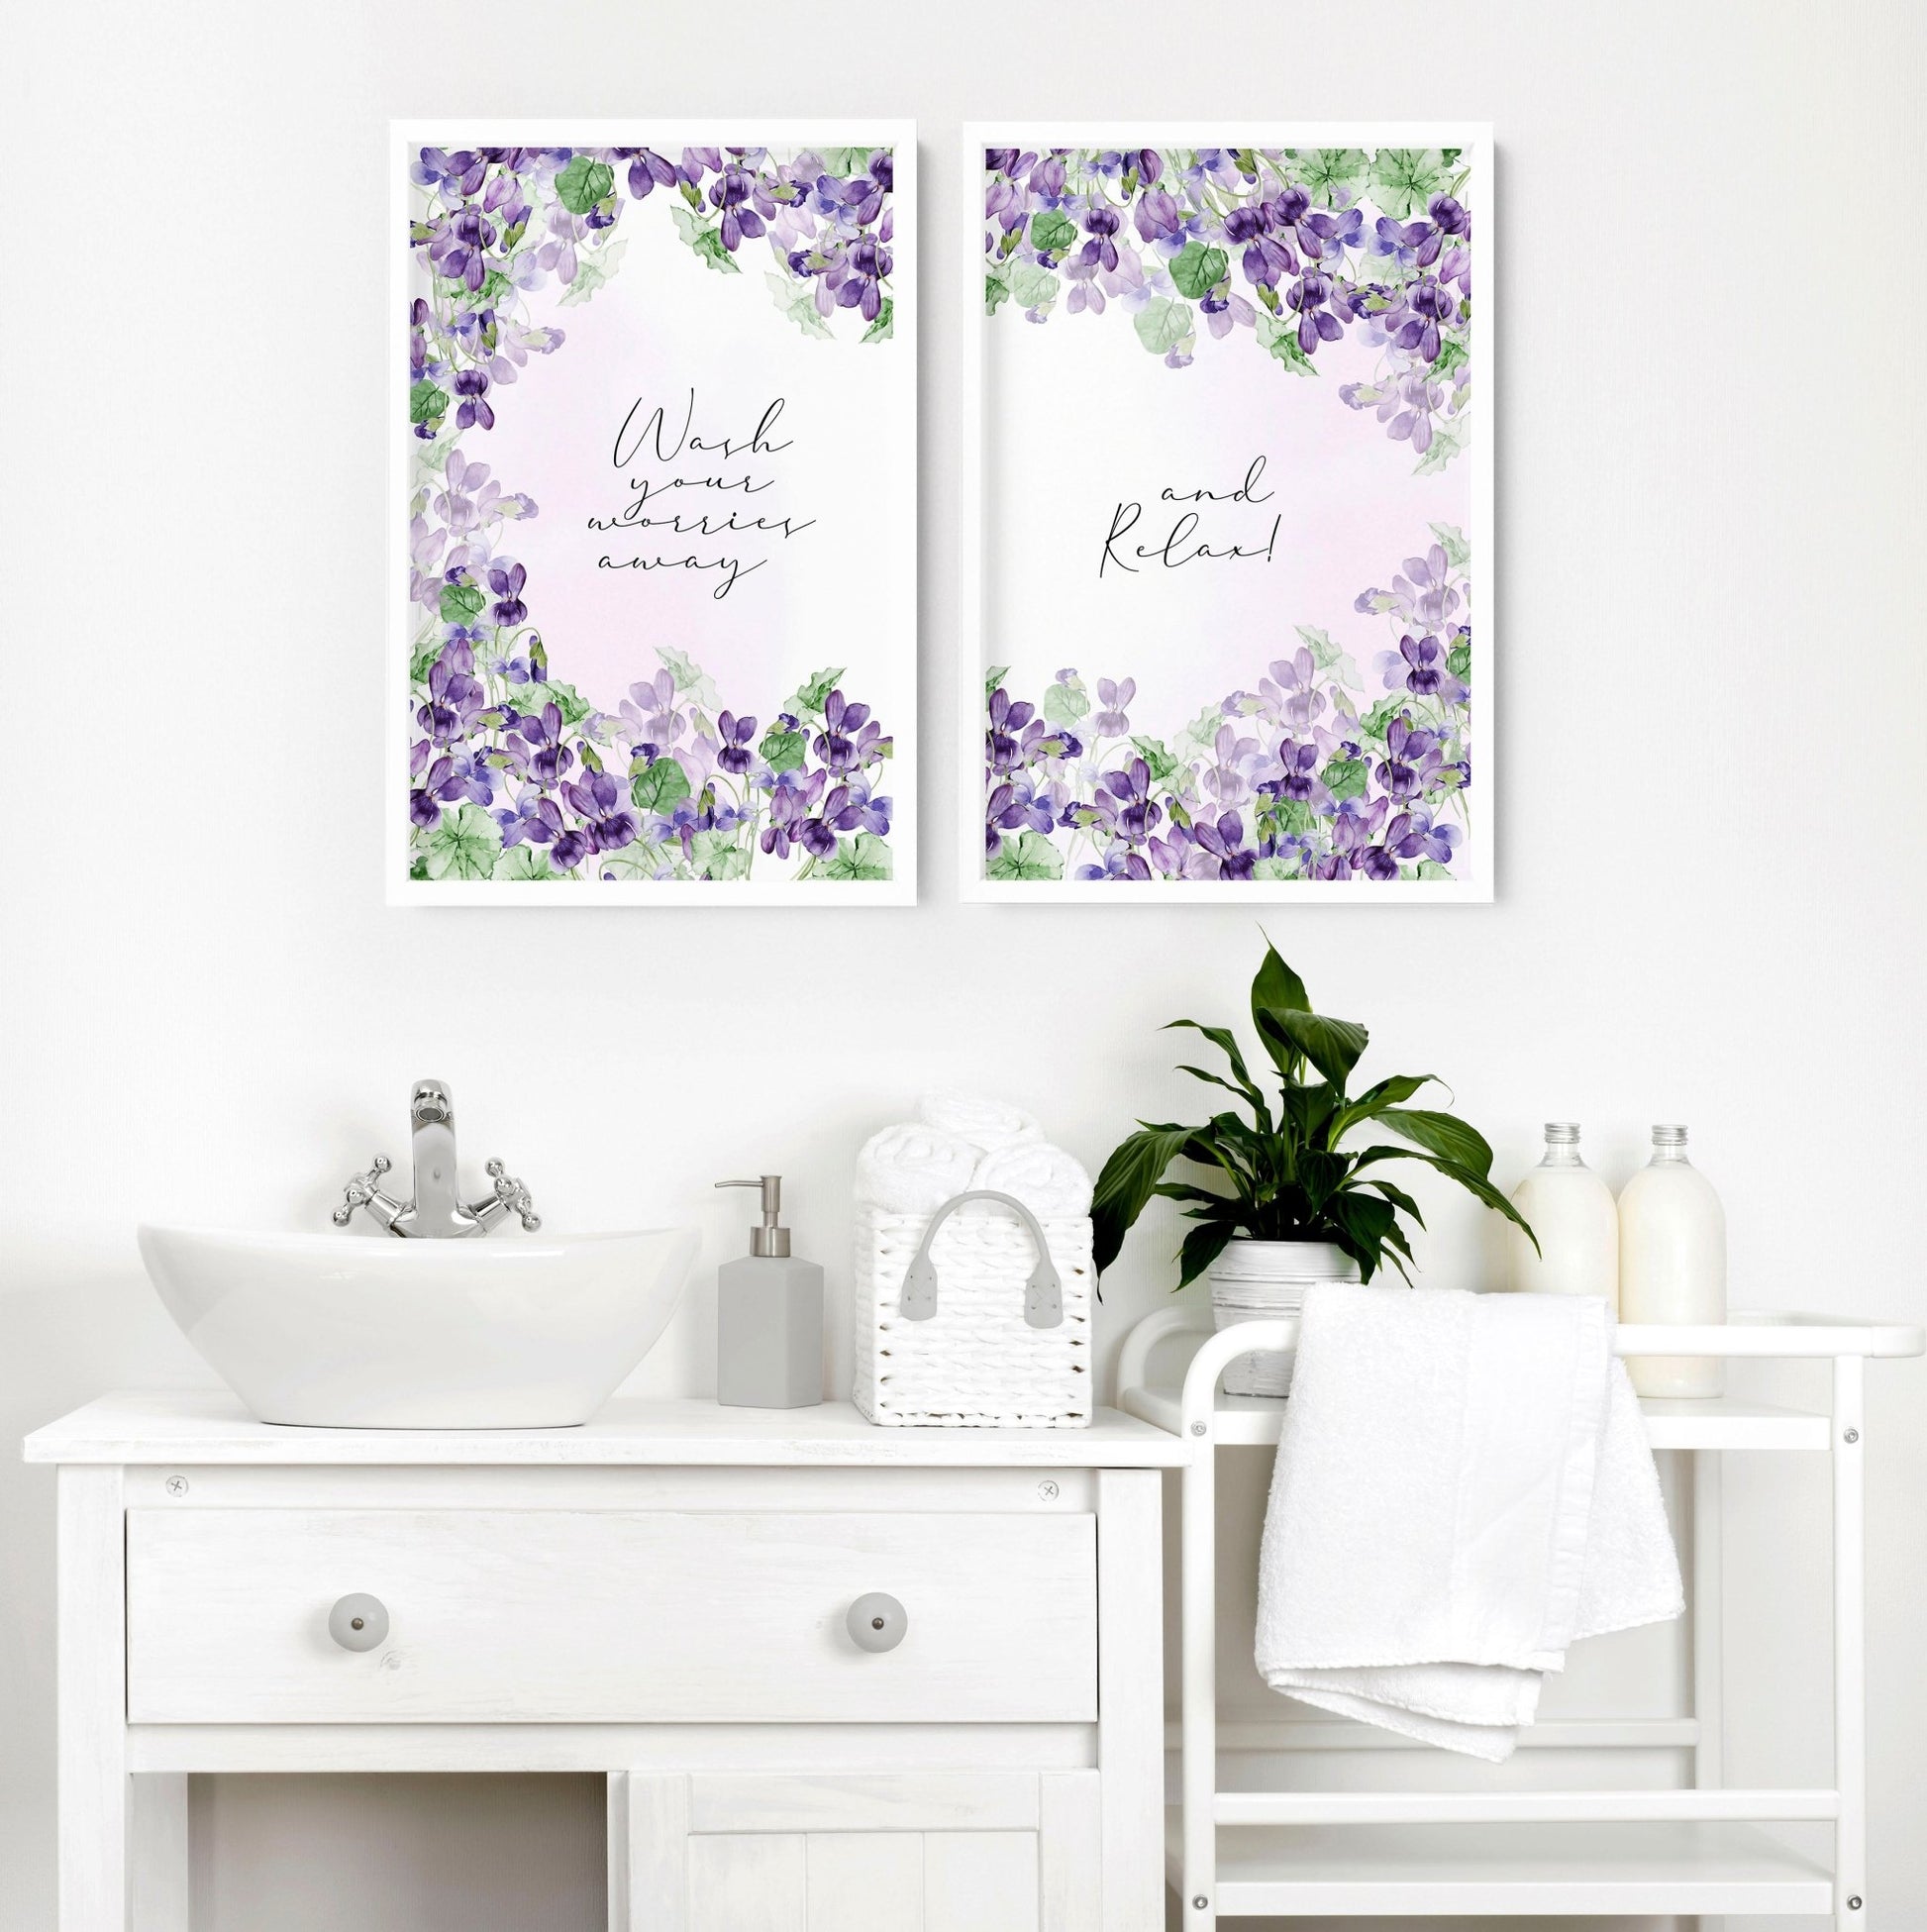 Bath pictures for wall | set of 2 Shabby Chic wall art prints